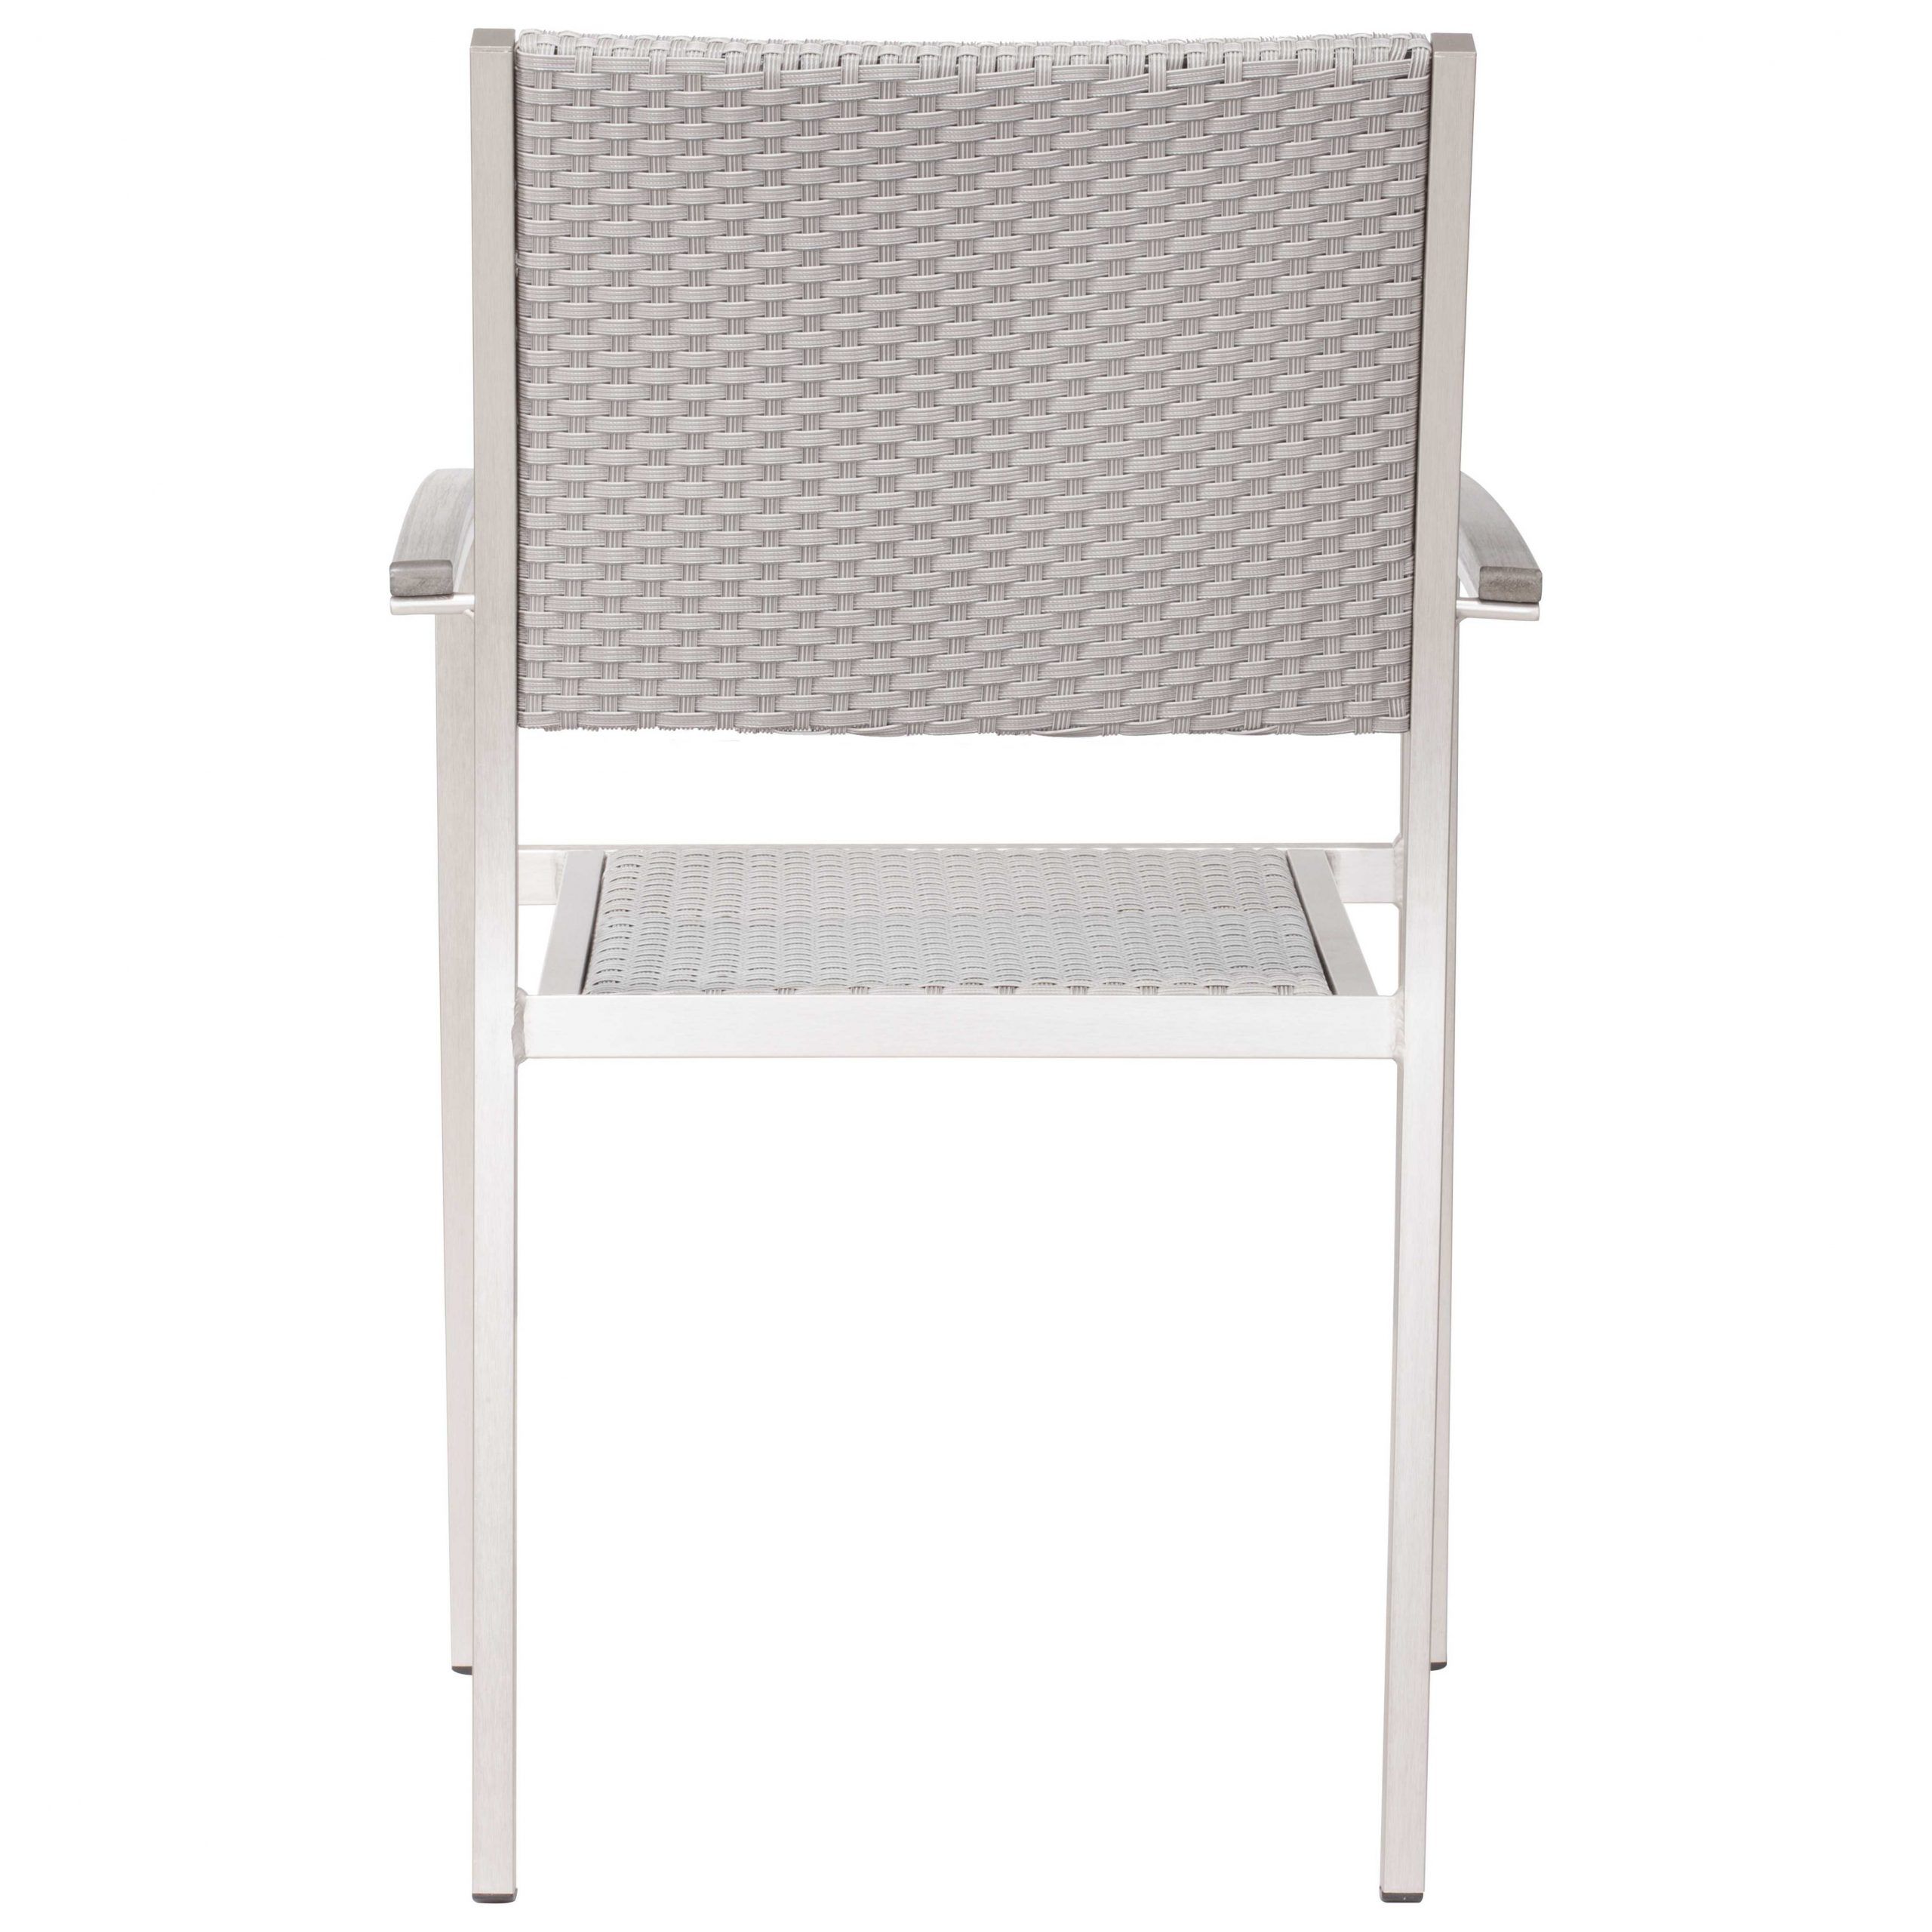 Zuo Outdoor Metropolitan Aluminum Silver Stackable Dining Arm Chair Set Throughout Metropolitan Outdoor Dining Chair Sets (View 11 of 15)